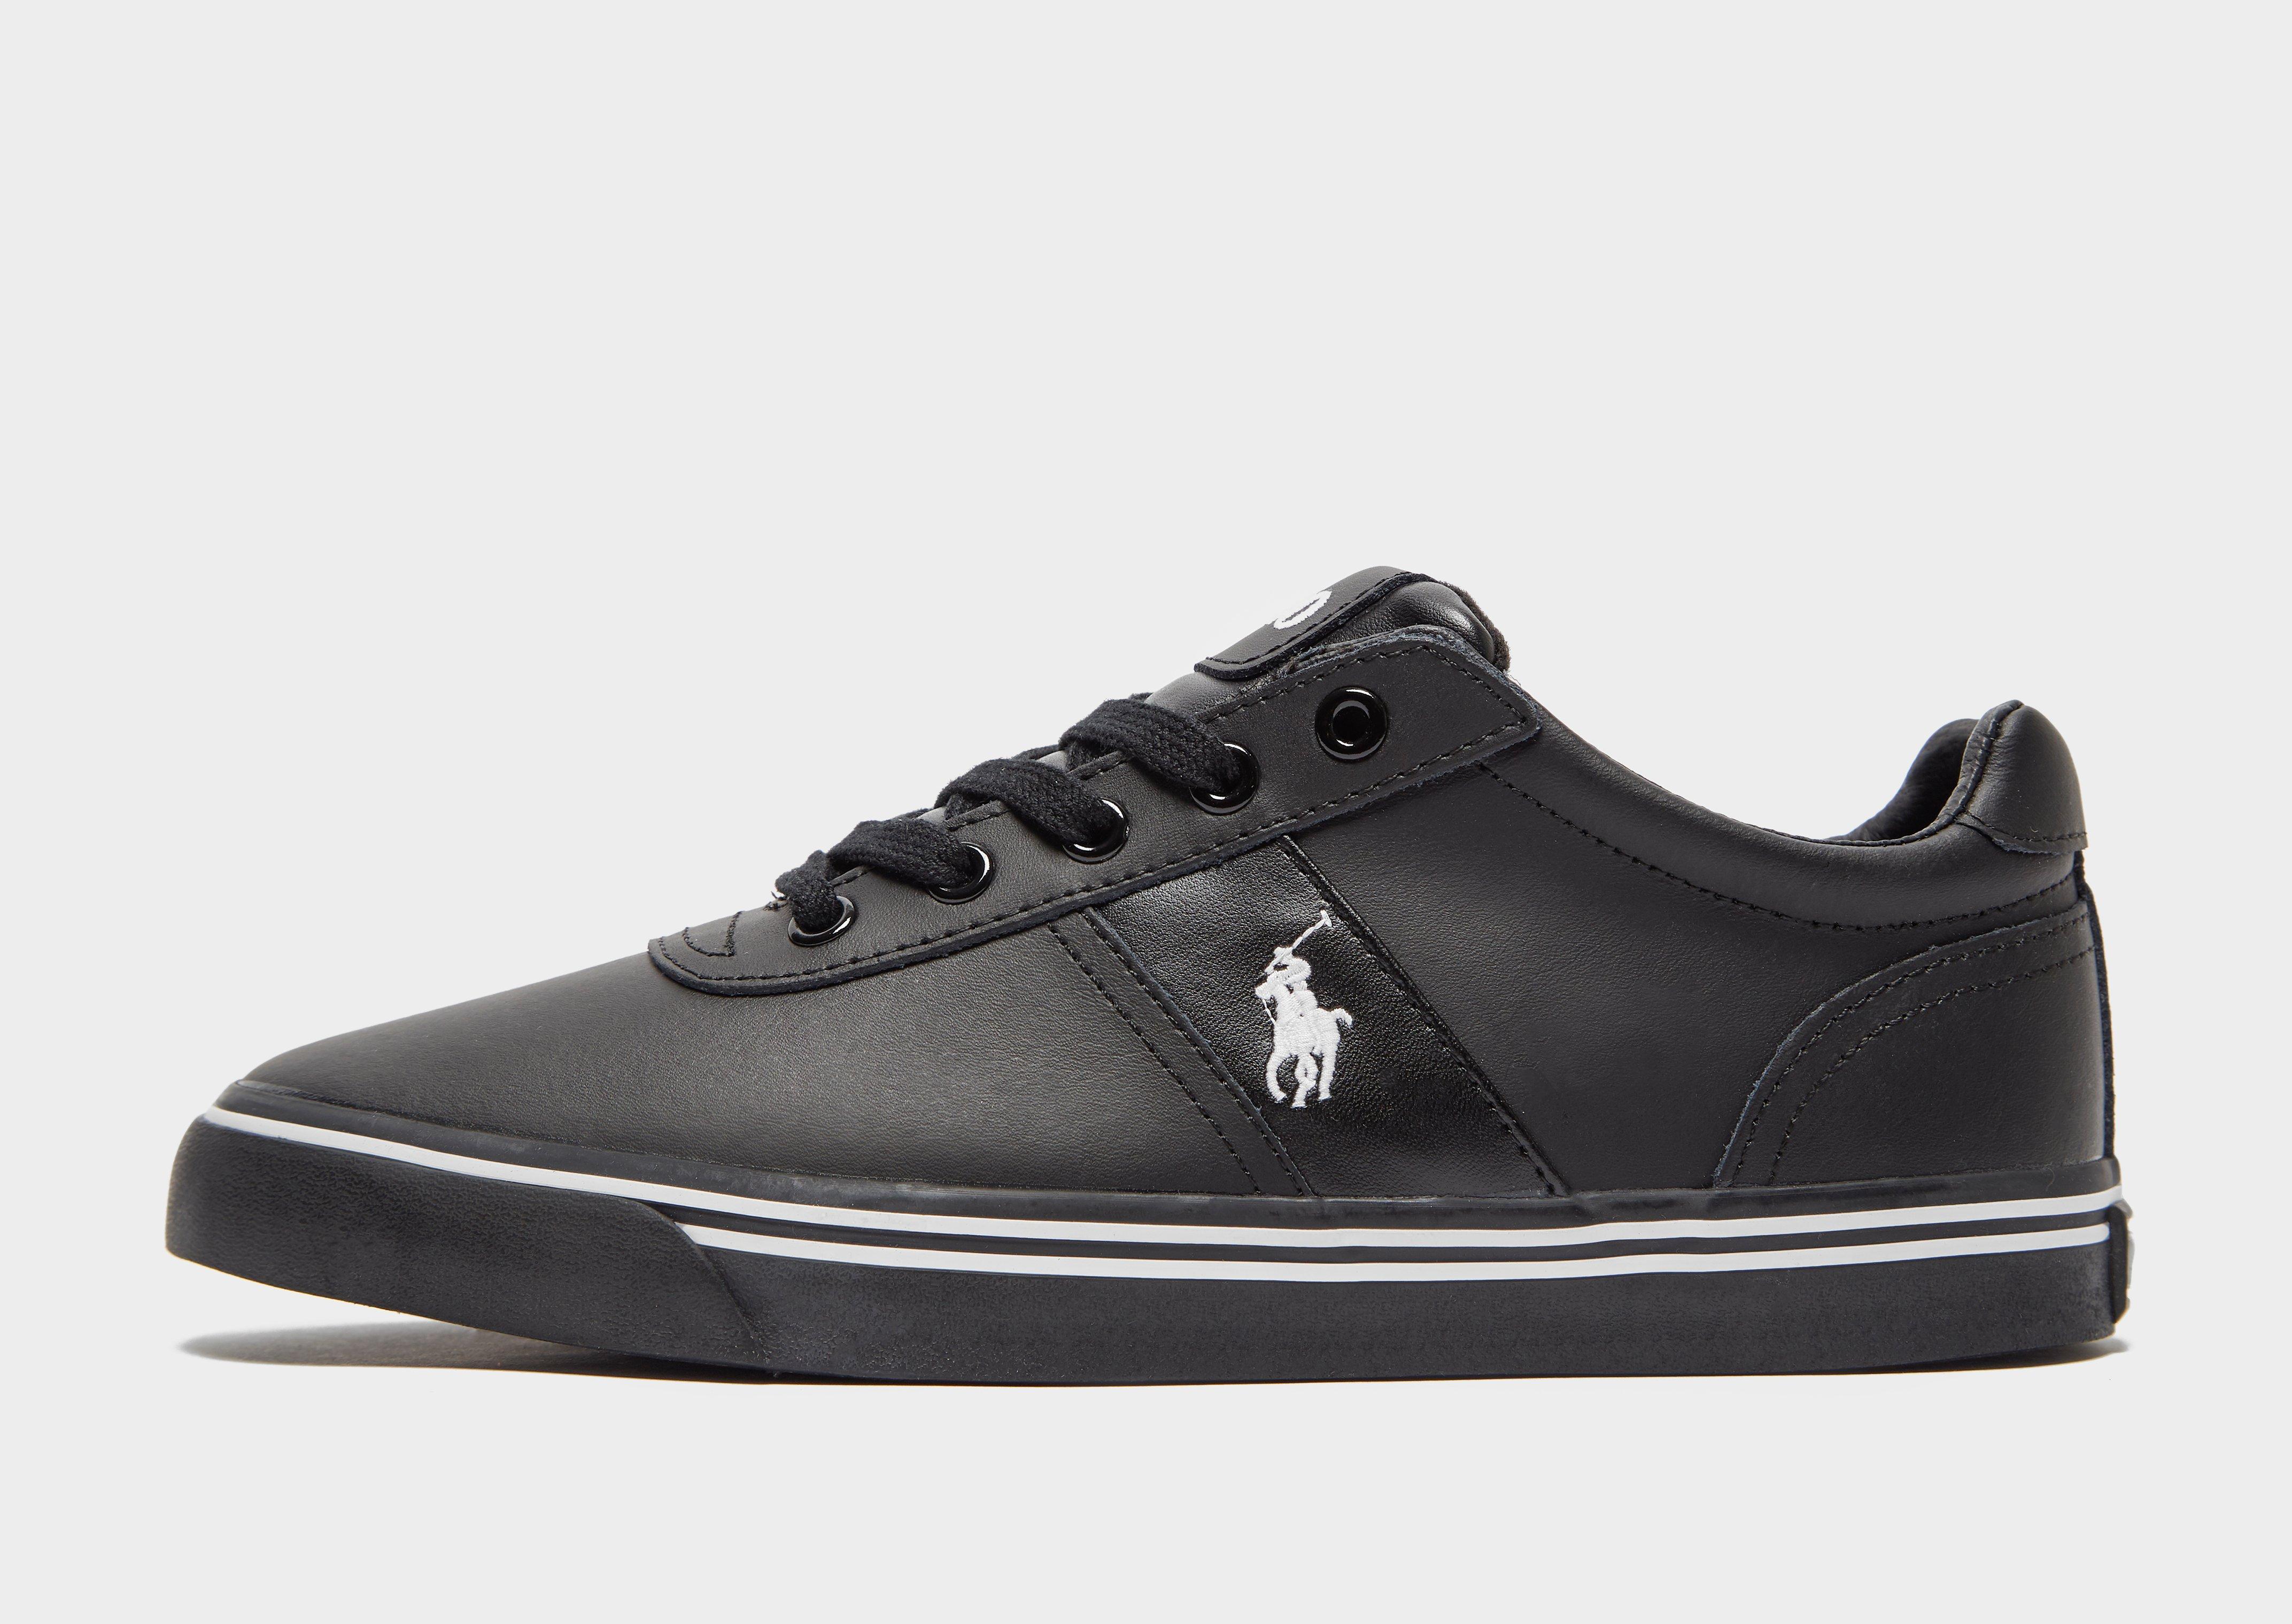 polo ralph lauren hanford leather trainers in black